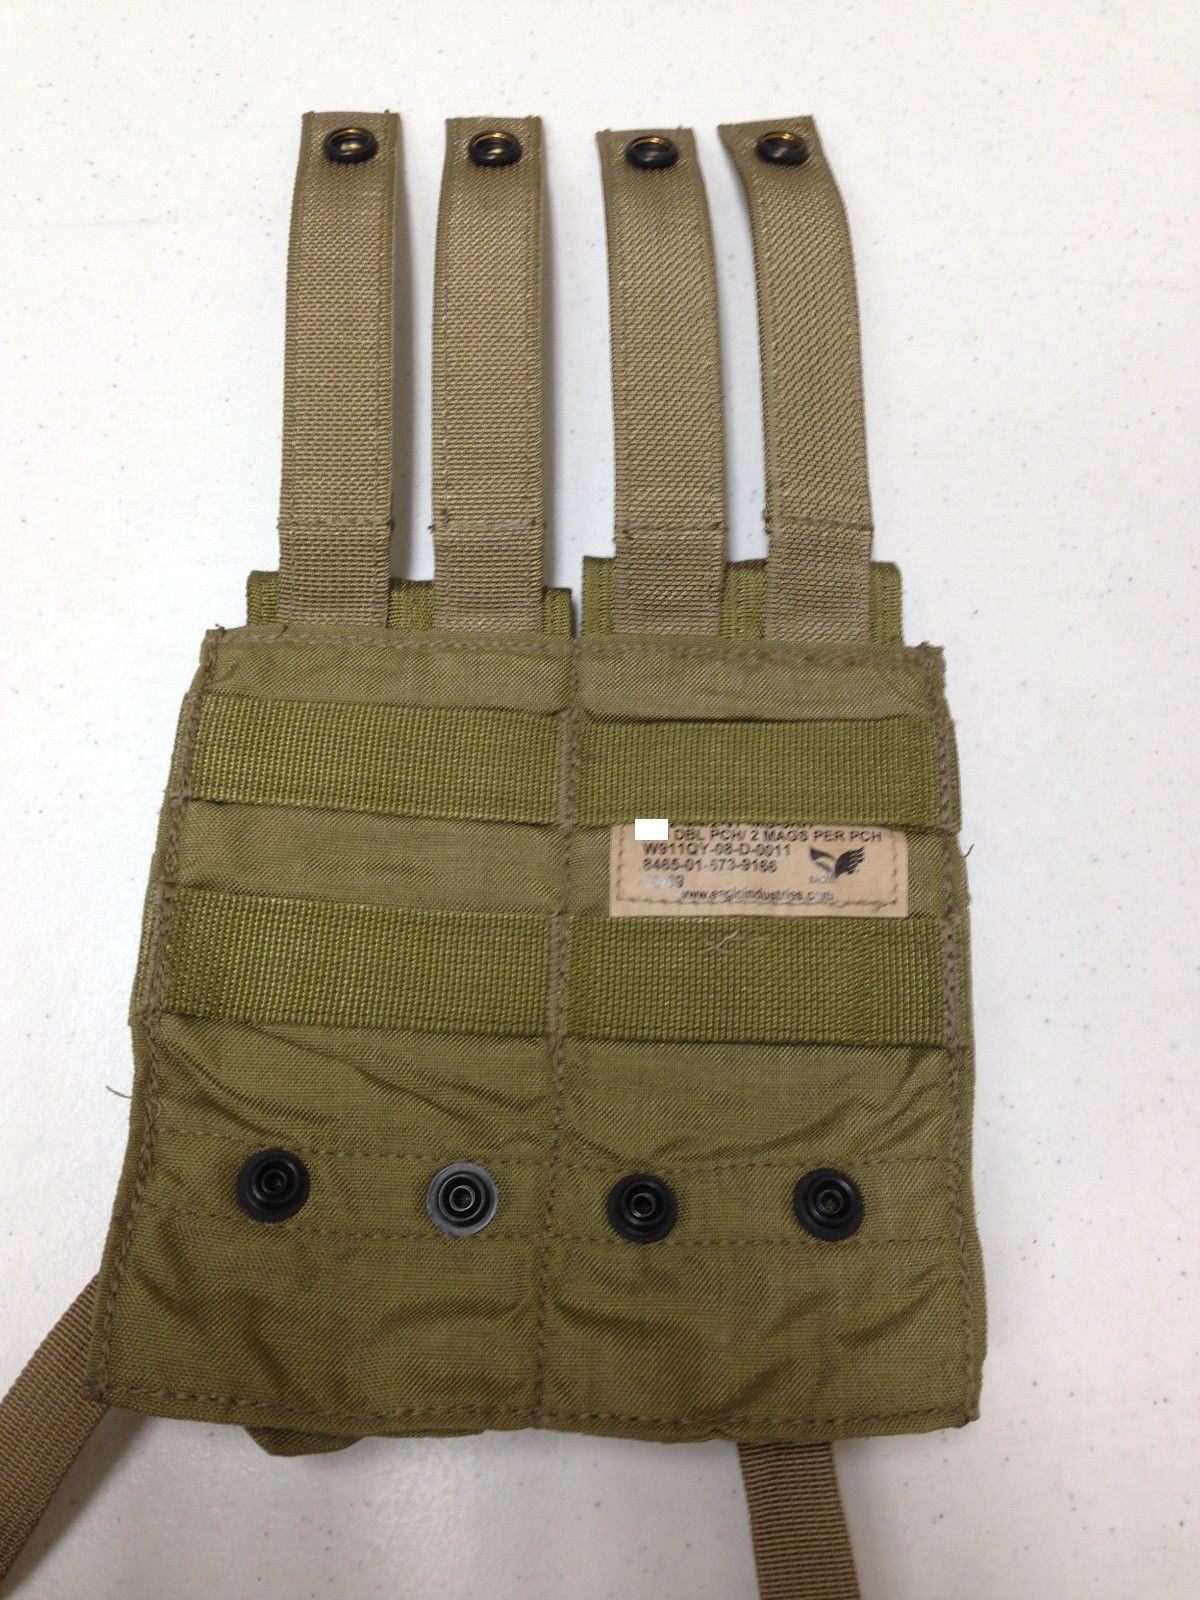 EAGLE INDUSTRIES DOUBLE FITS MAG LIGHTWEIGHT POUCH DBL 2 MAGS PER PCH ...